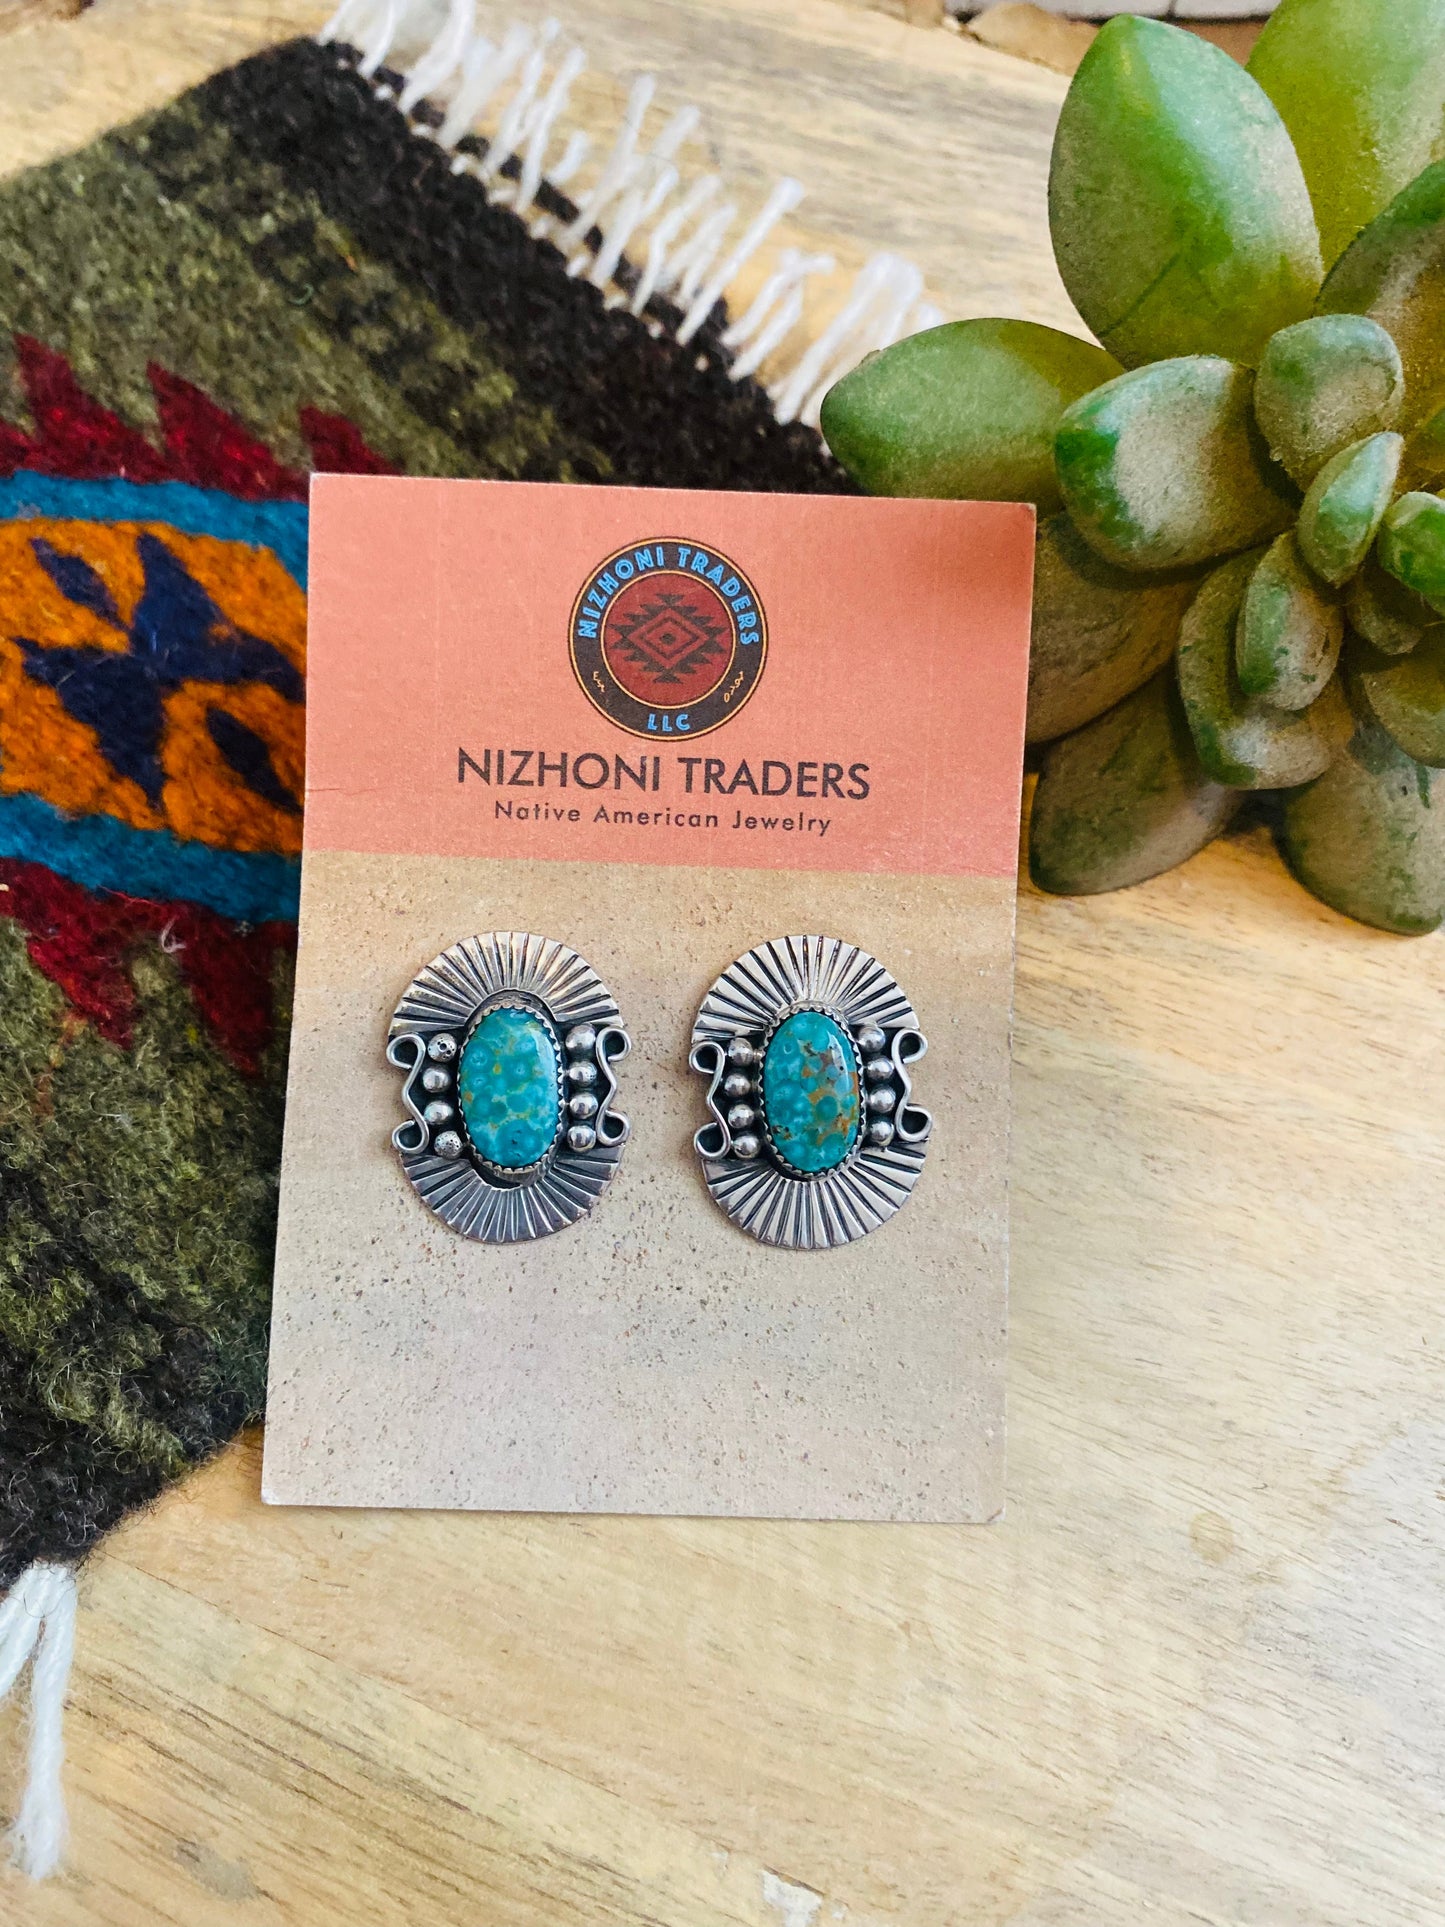 Navajo Sterling Silver & Royston Turquoise Post Earrings Signed